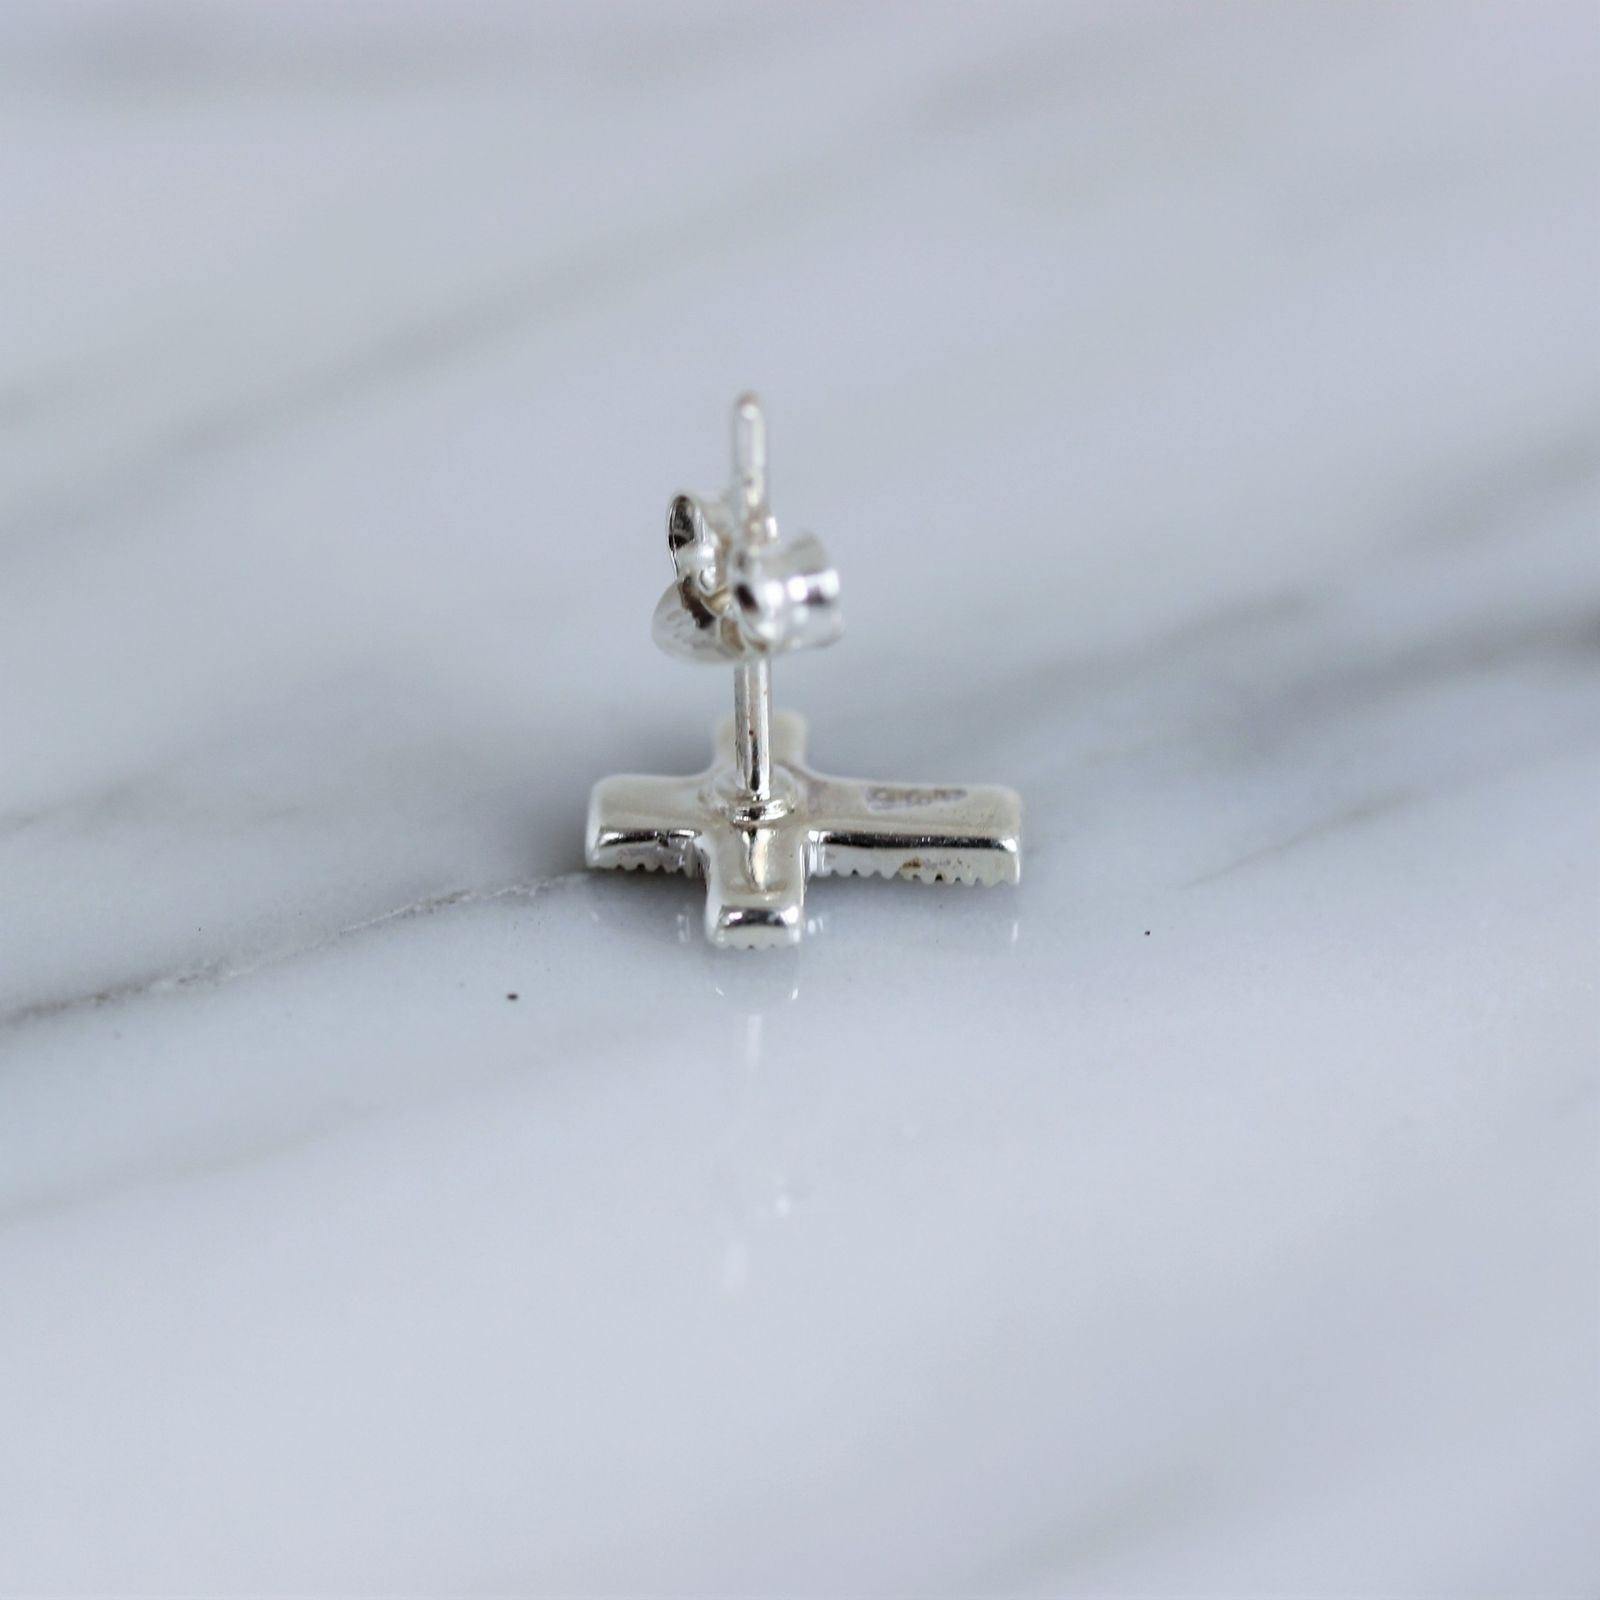 Sterling Silver Marcasite Vintage Style Religious Cross Stud Earrings - STERLING SILVER DESIGNS